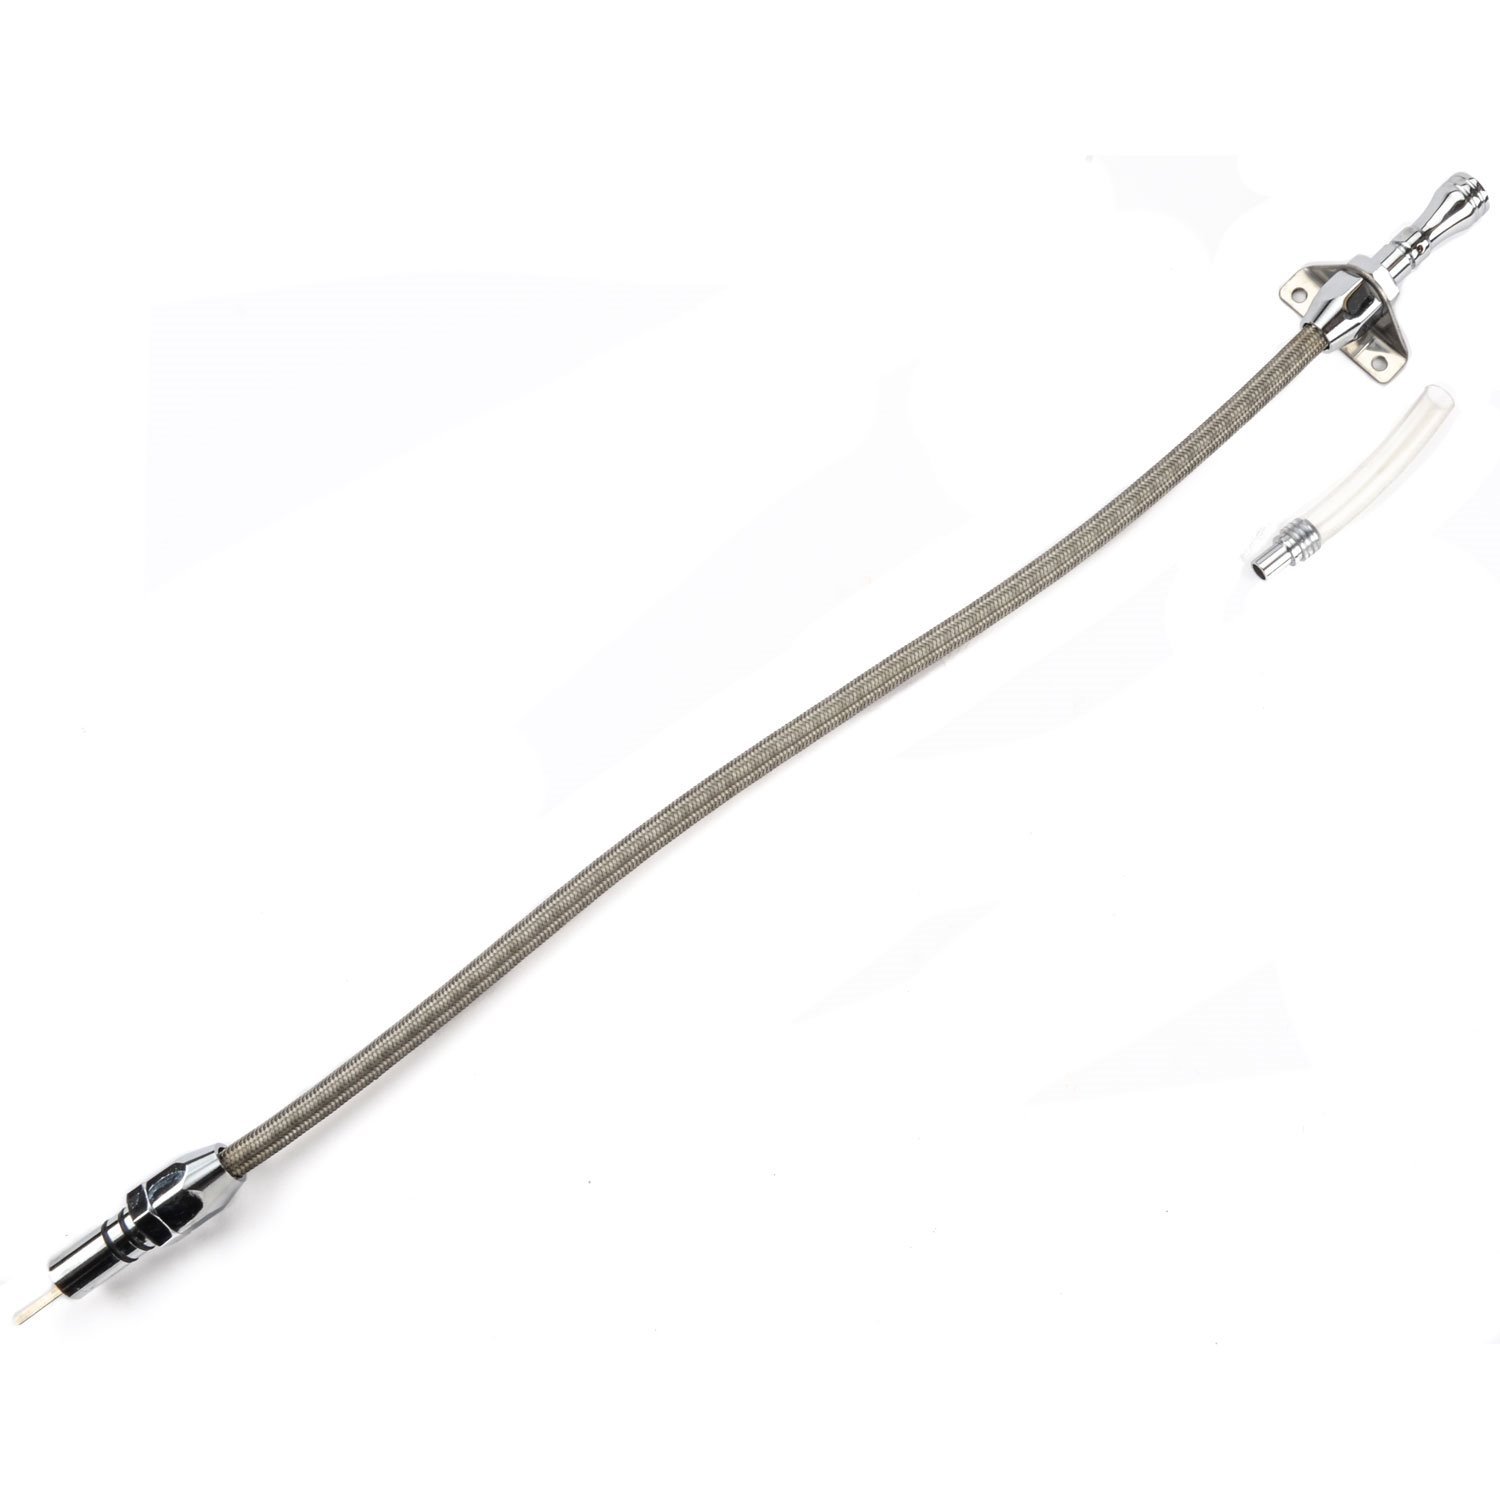 Flexible Braided Transmission Dipstick for TH700-R4 [Polished]